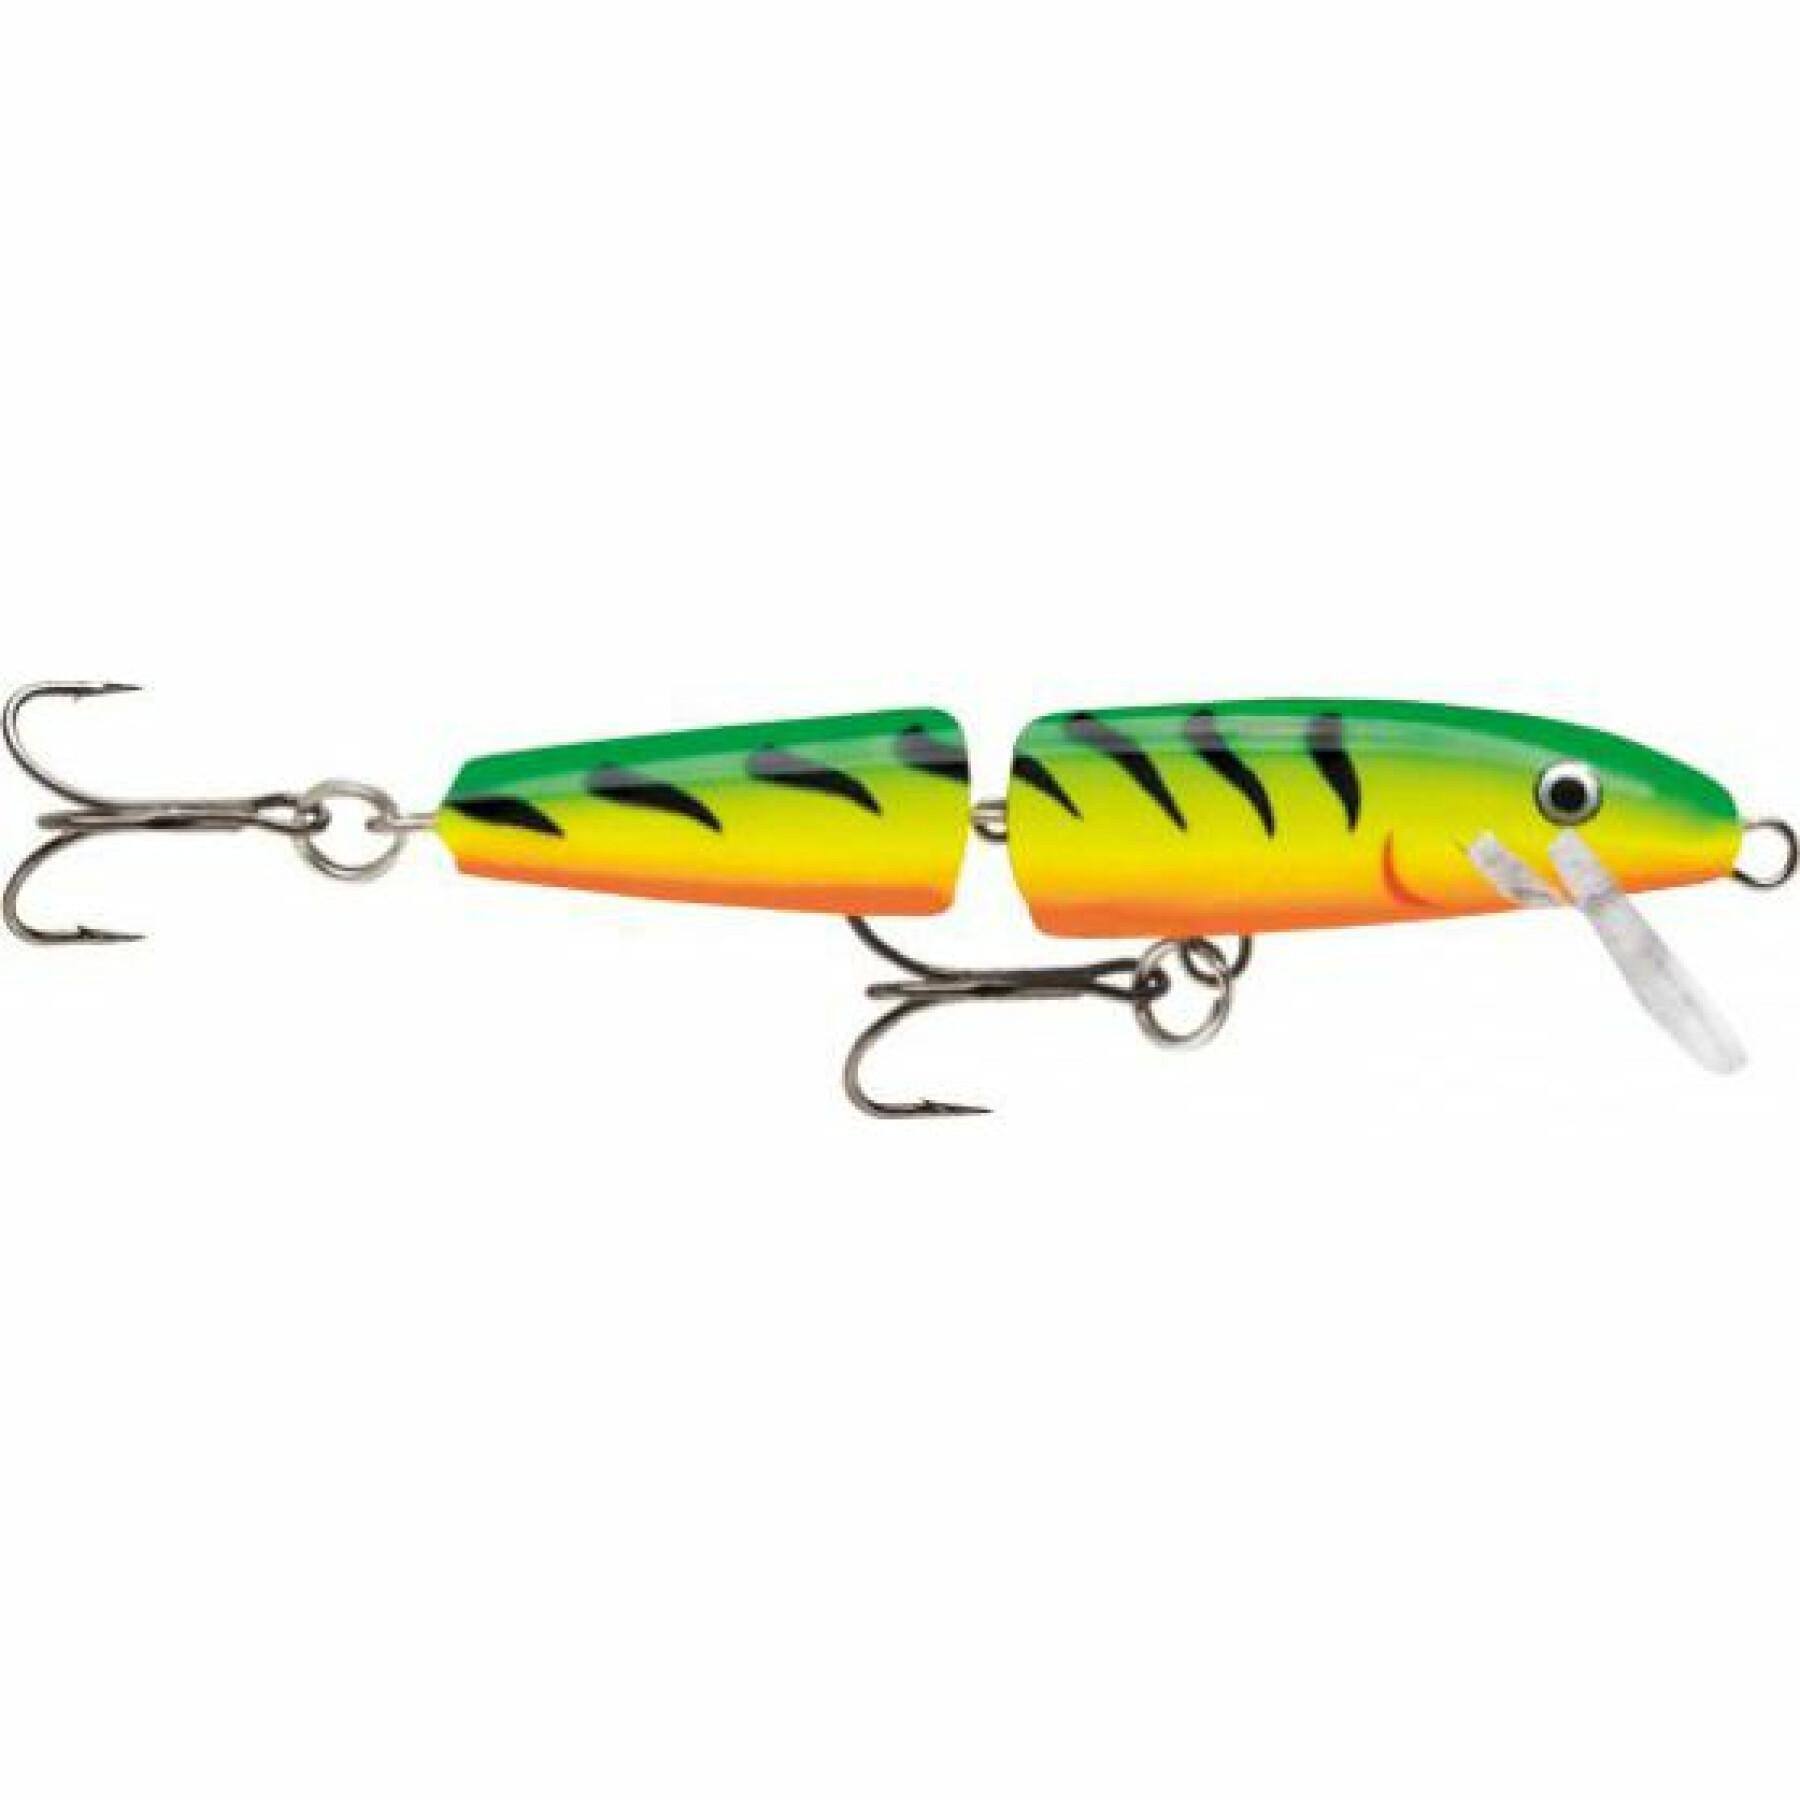 Engodo flutuante Rapala jointed® 7 cm